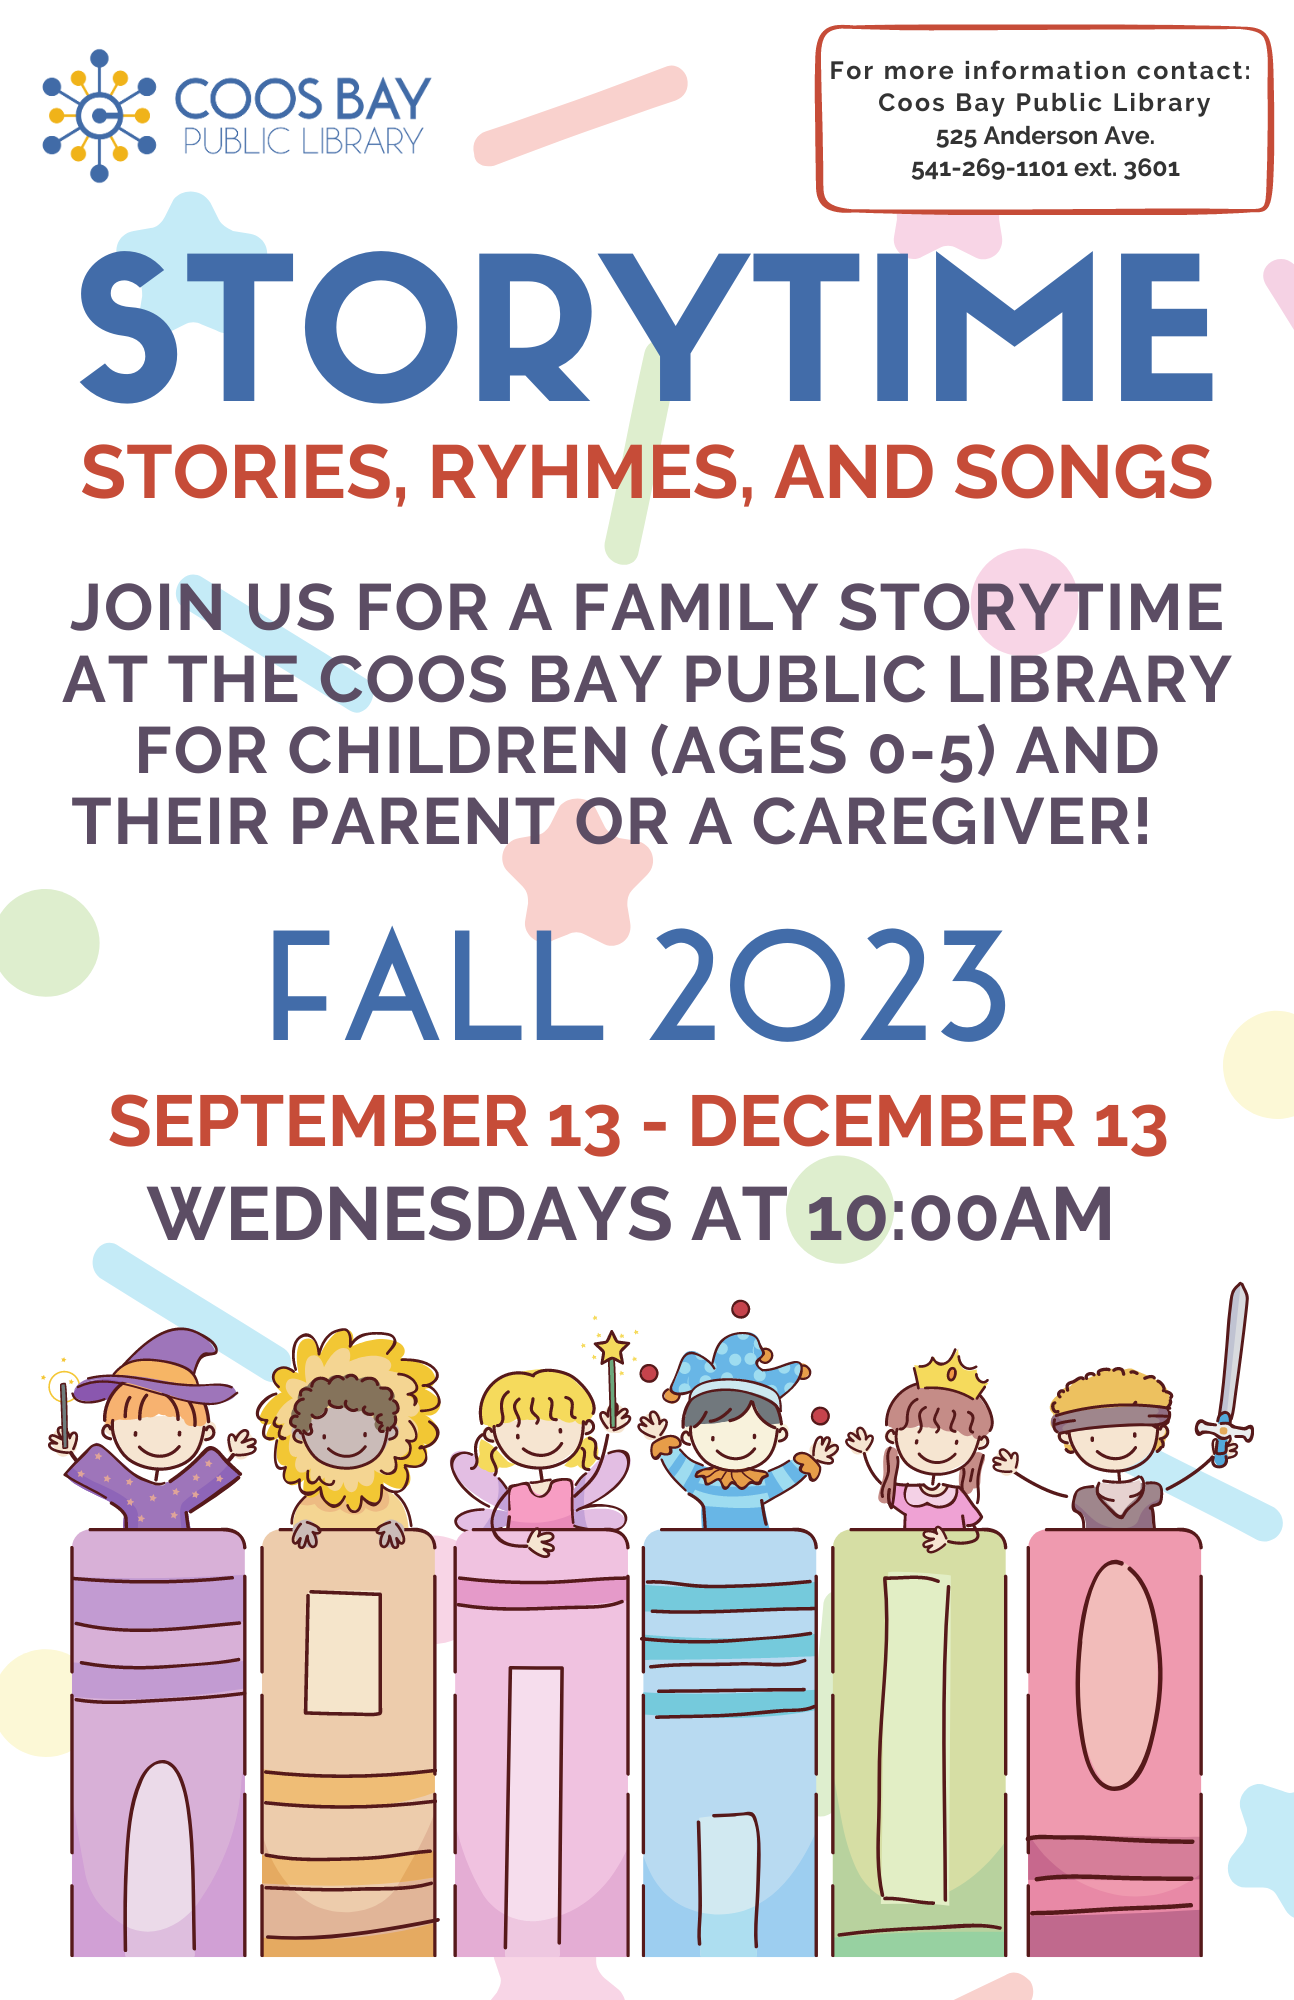 Fall 2023 Storytime